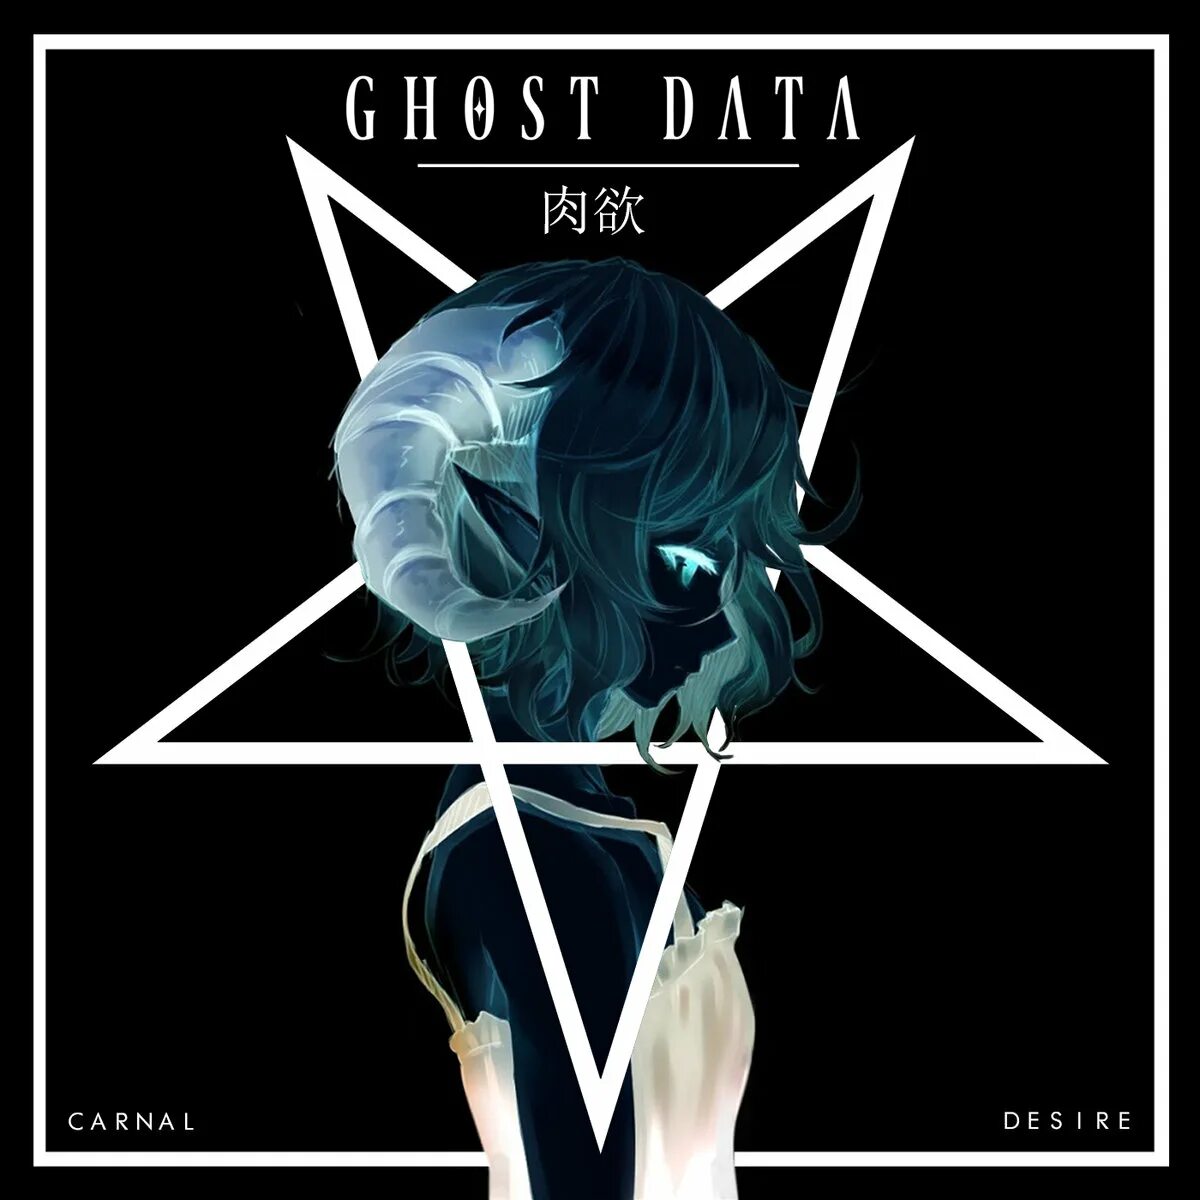 Void data. Ghost data. Ghost data обложки. Ghost data Full bodied. Moikaloop Ghost data.